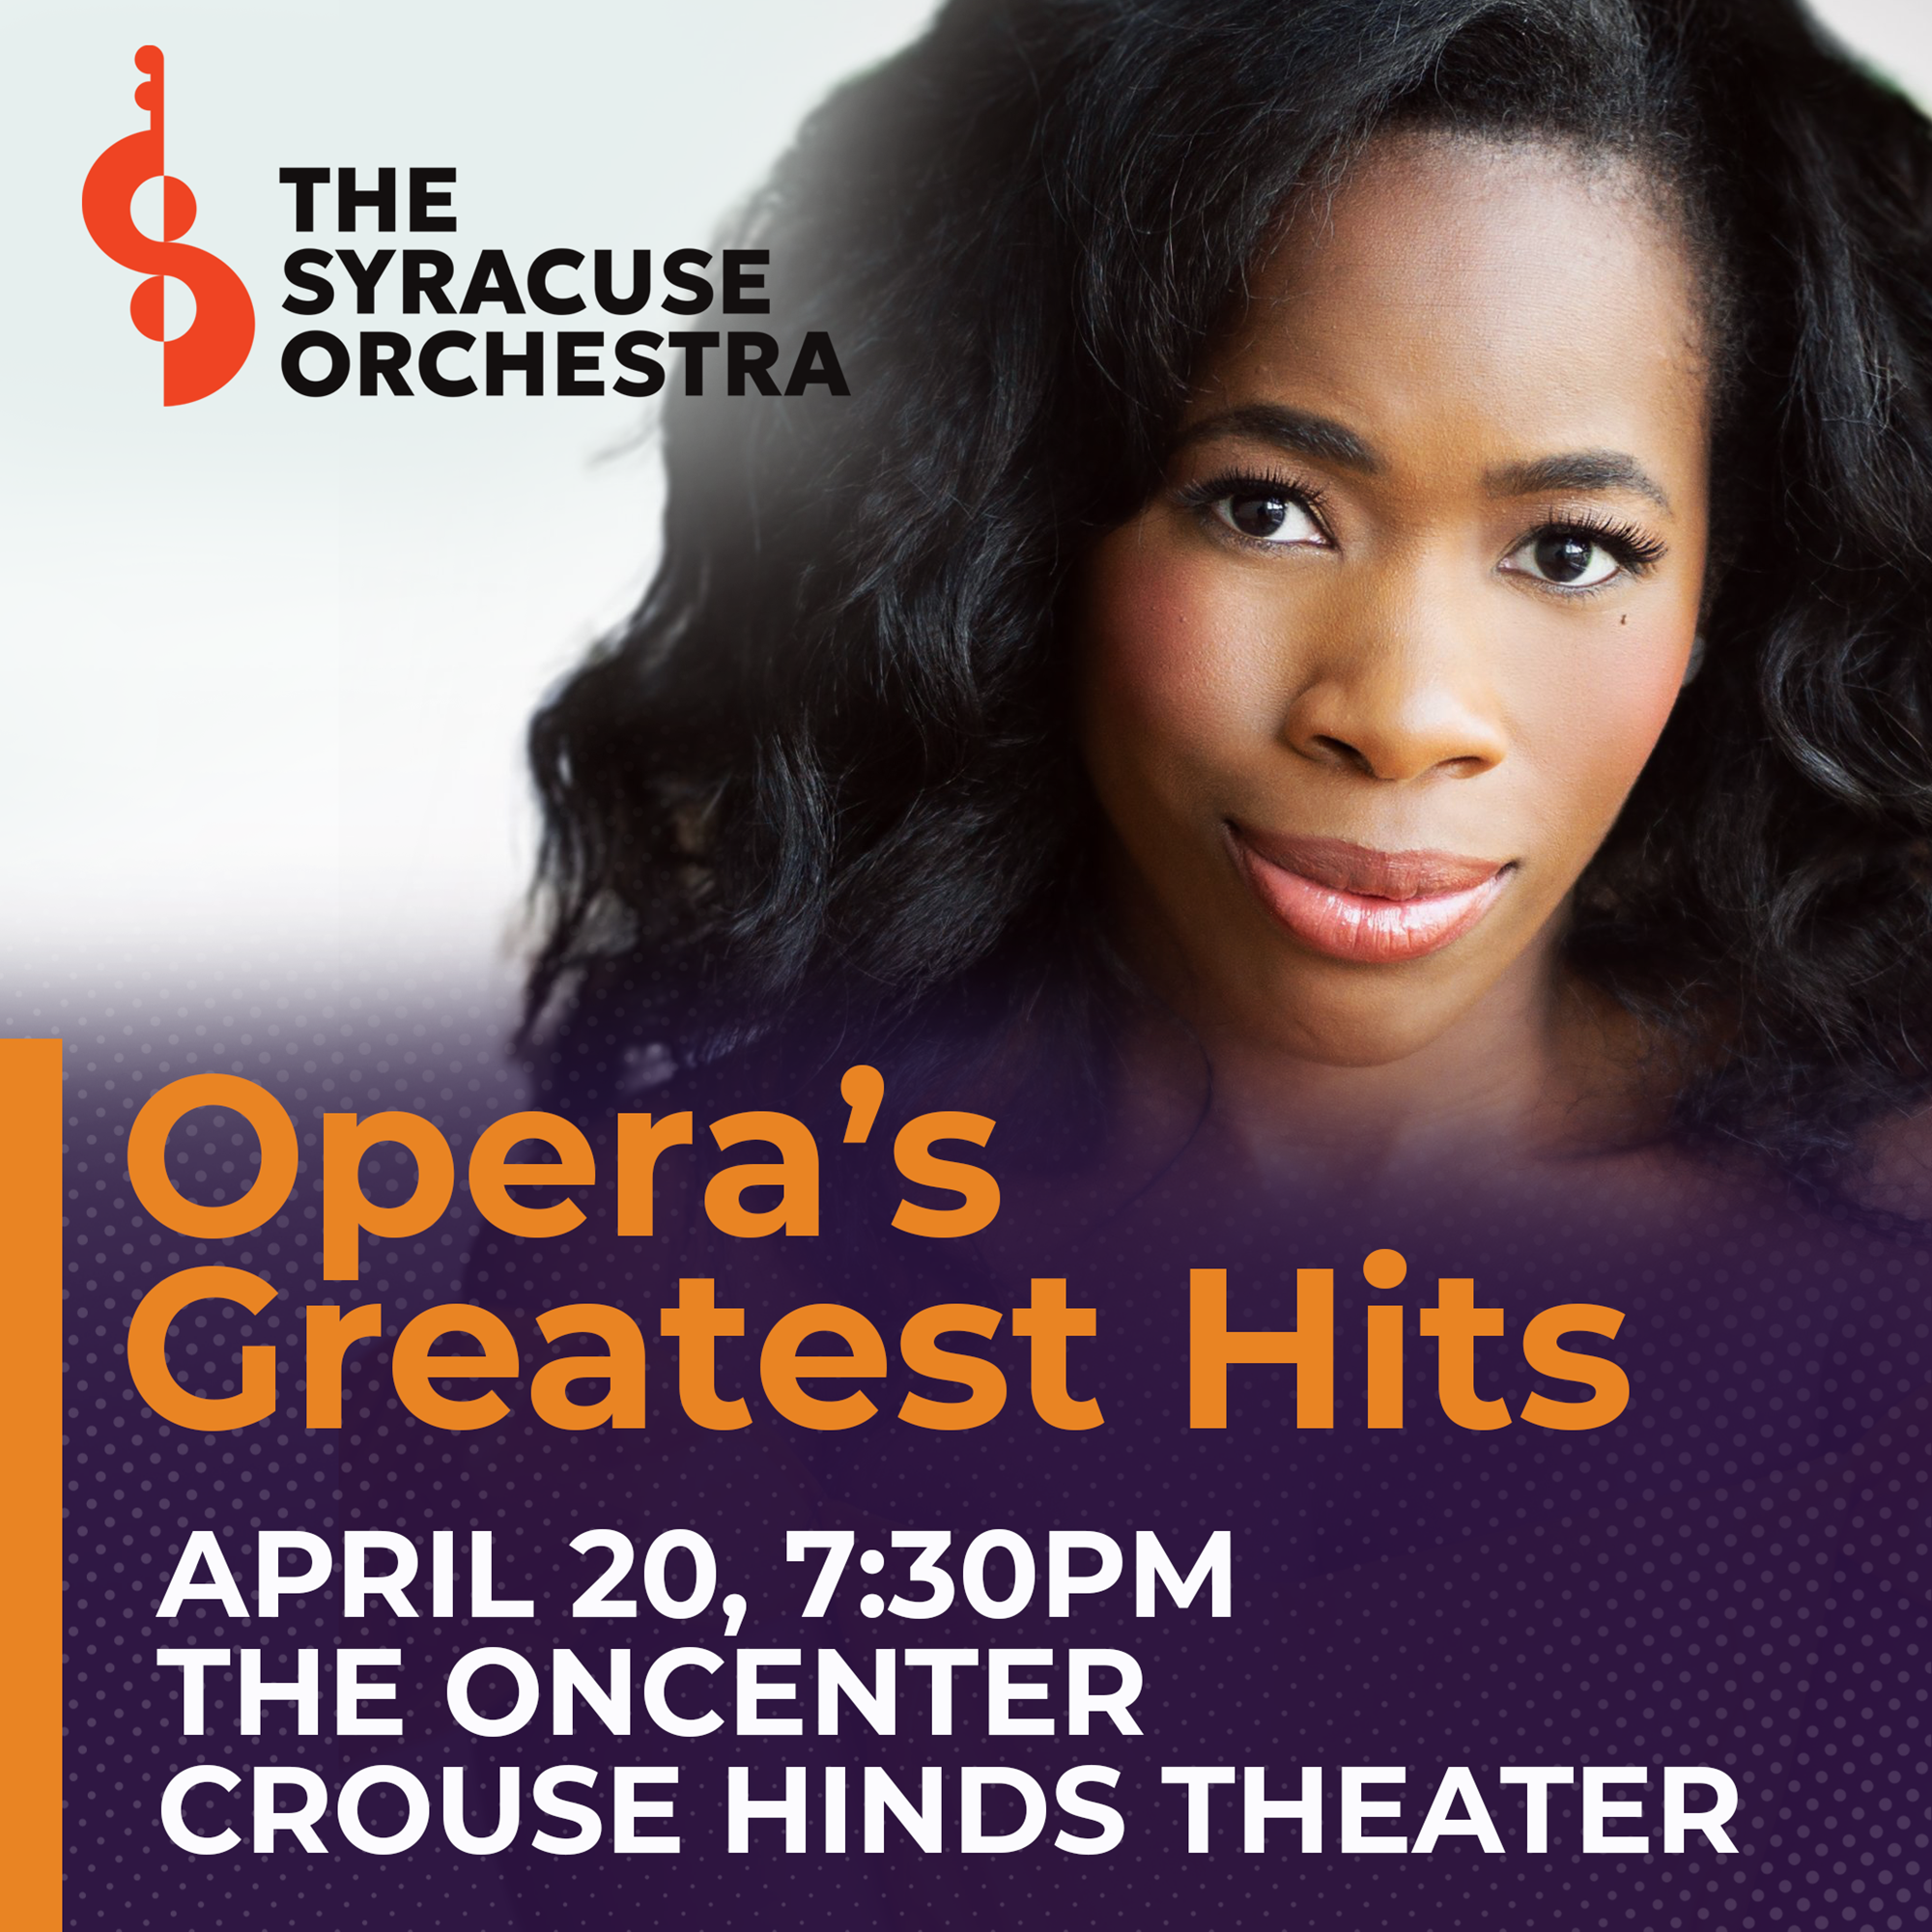 The Syracuse Orchestra presents Opera's Greatest Hits